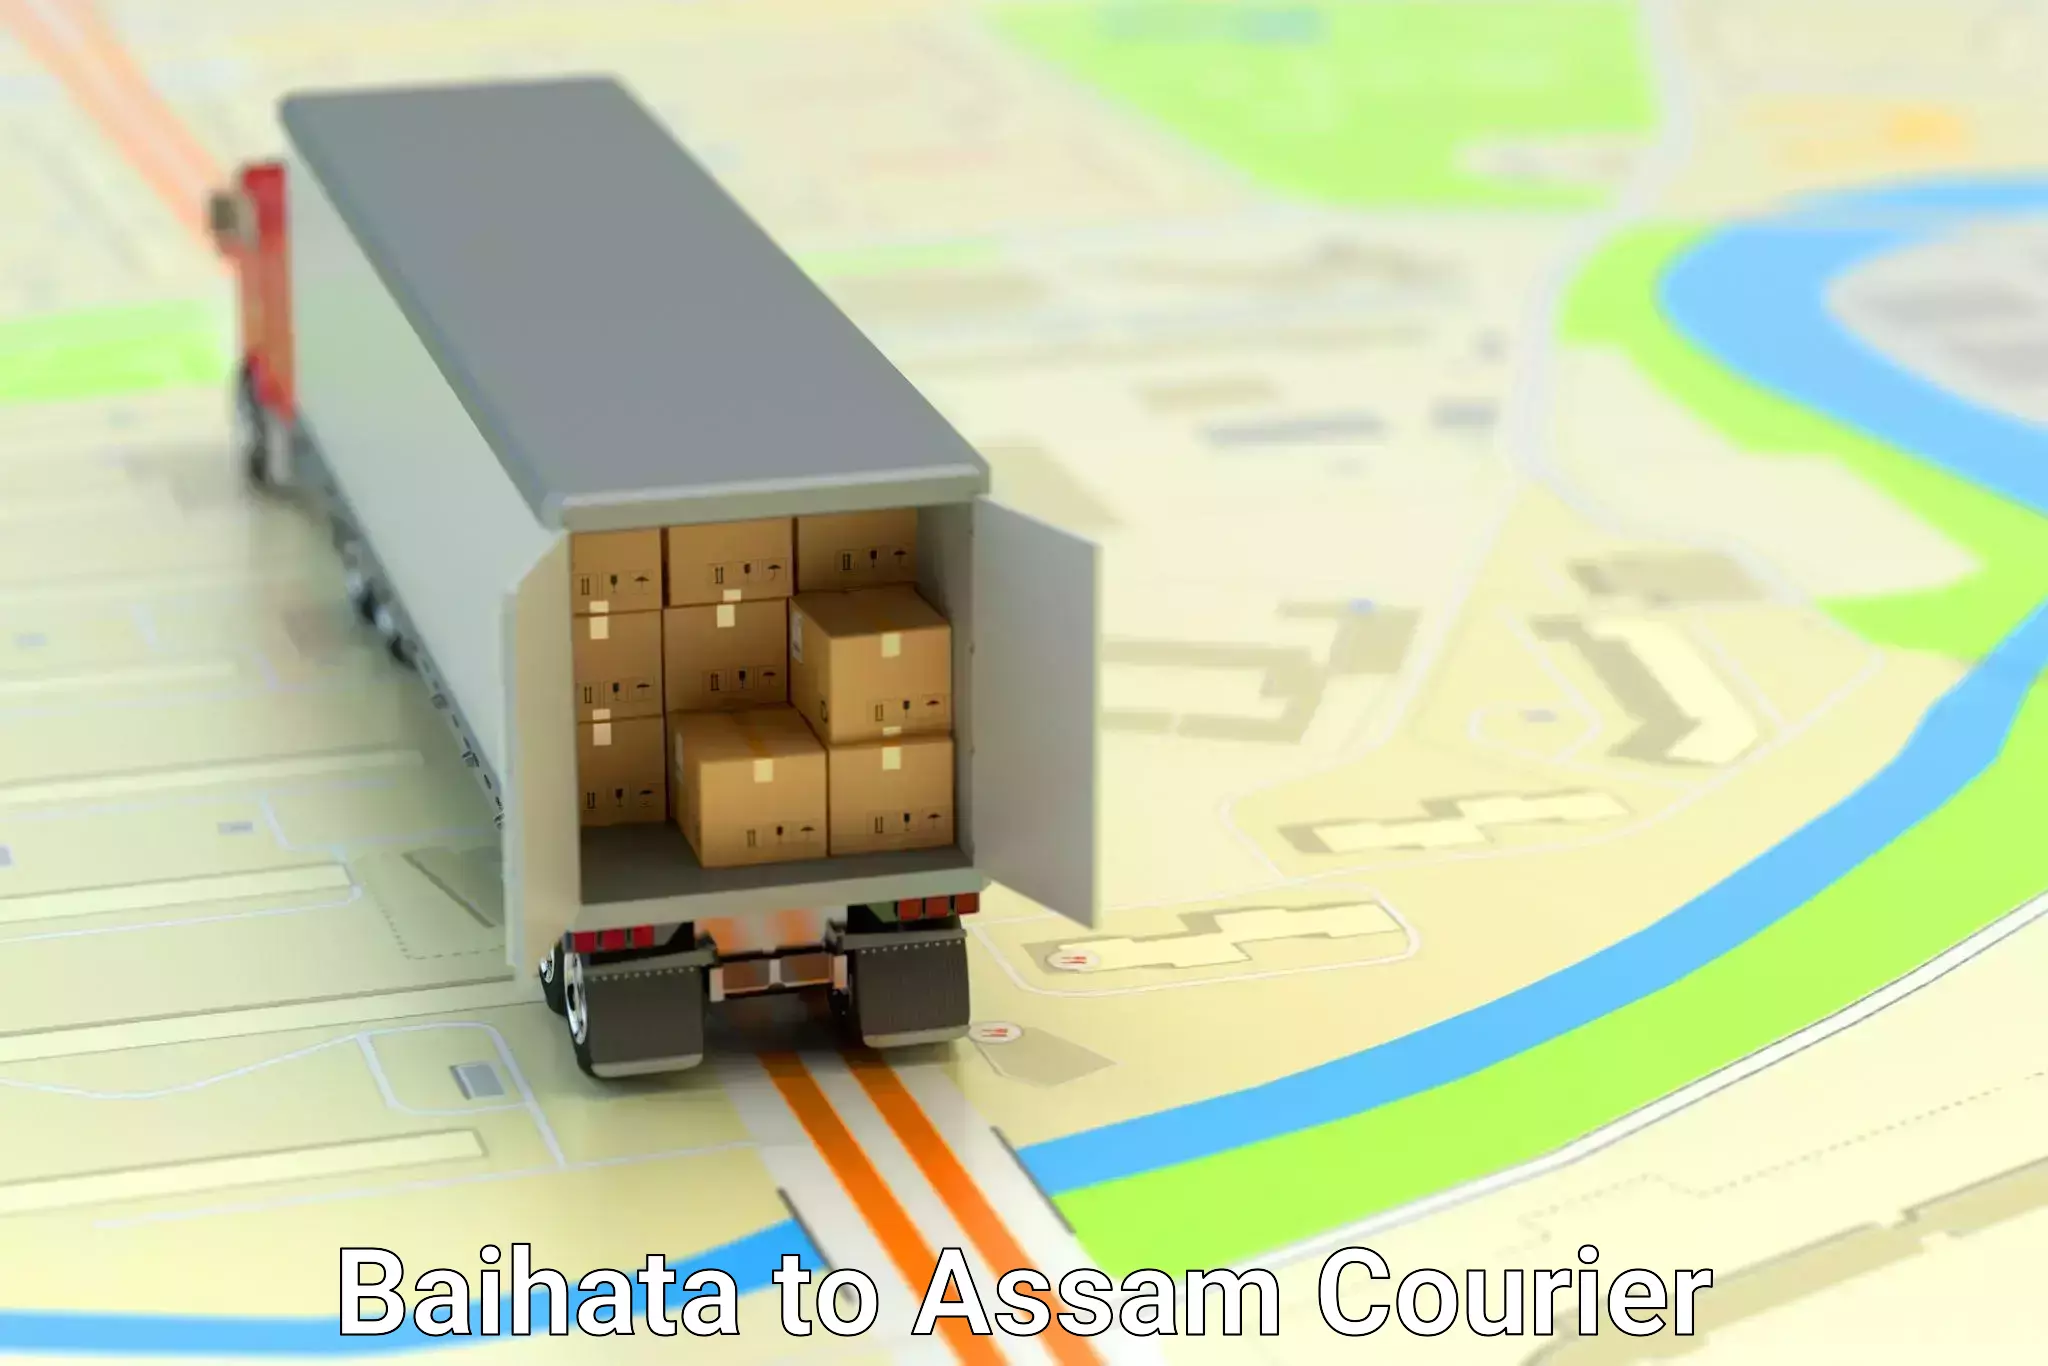 Parcel handling and care in Baihata to Baihata